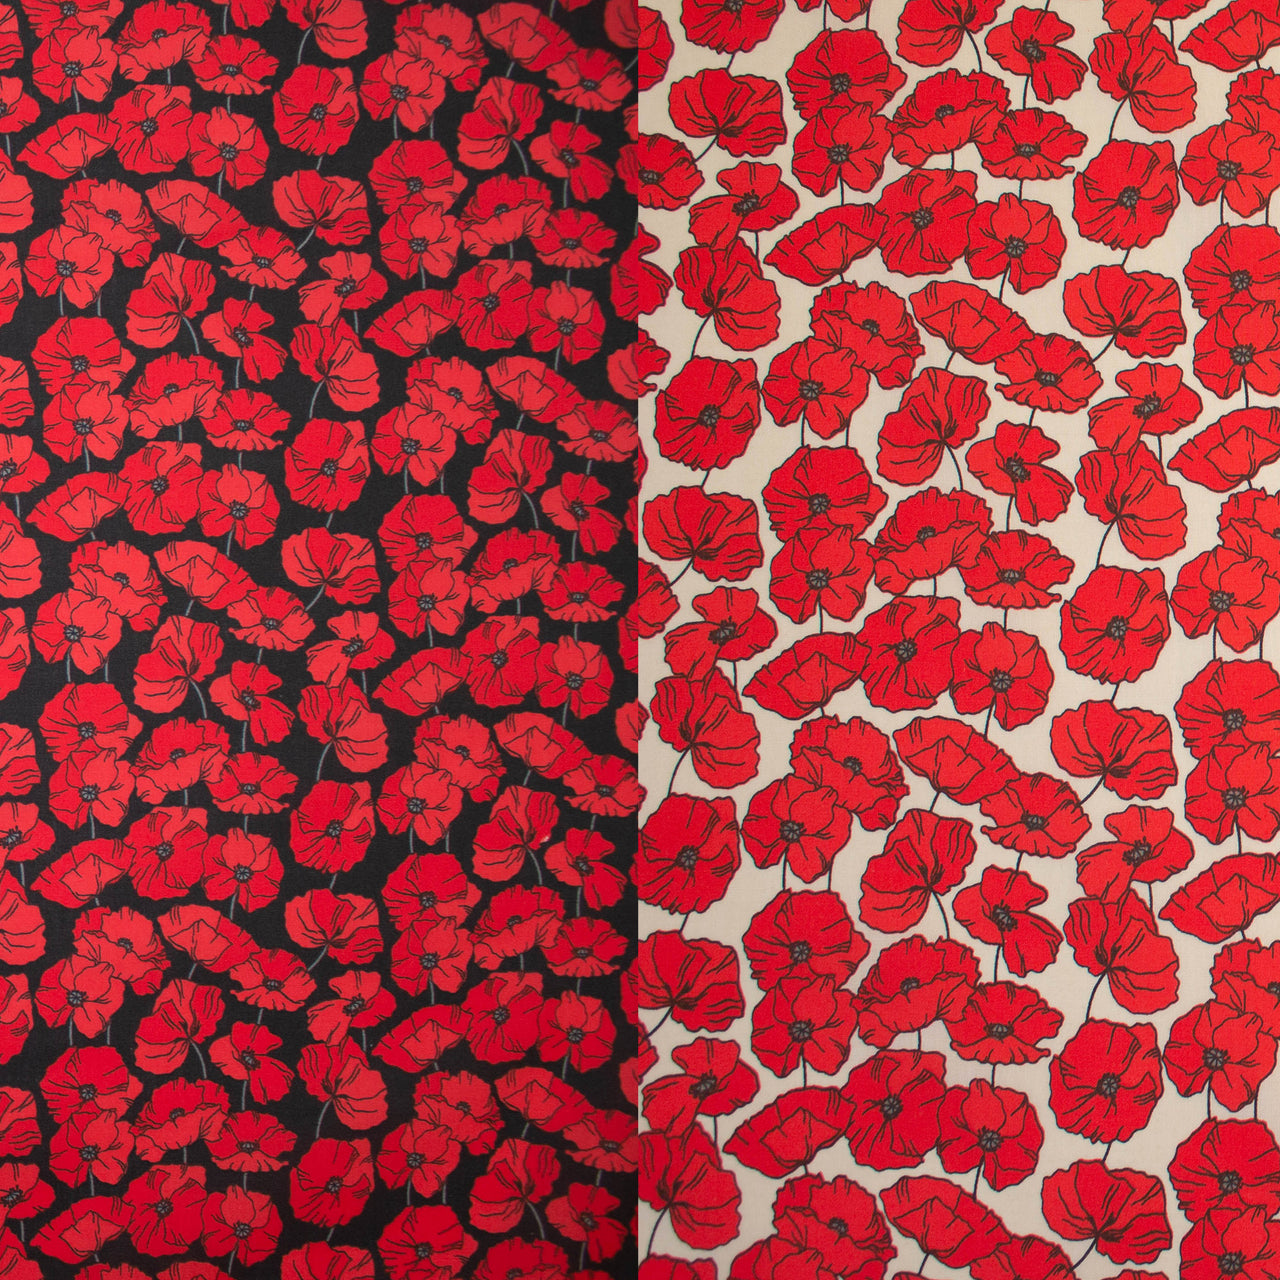 Poppy Poppies Flower for Remembrance Sunday - Printed Poly Cotton Fabric